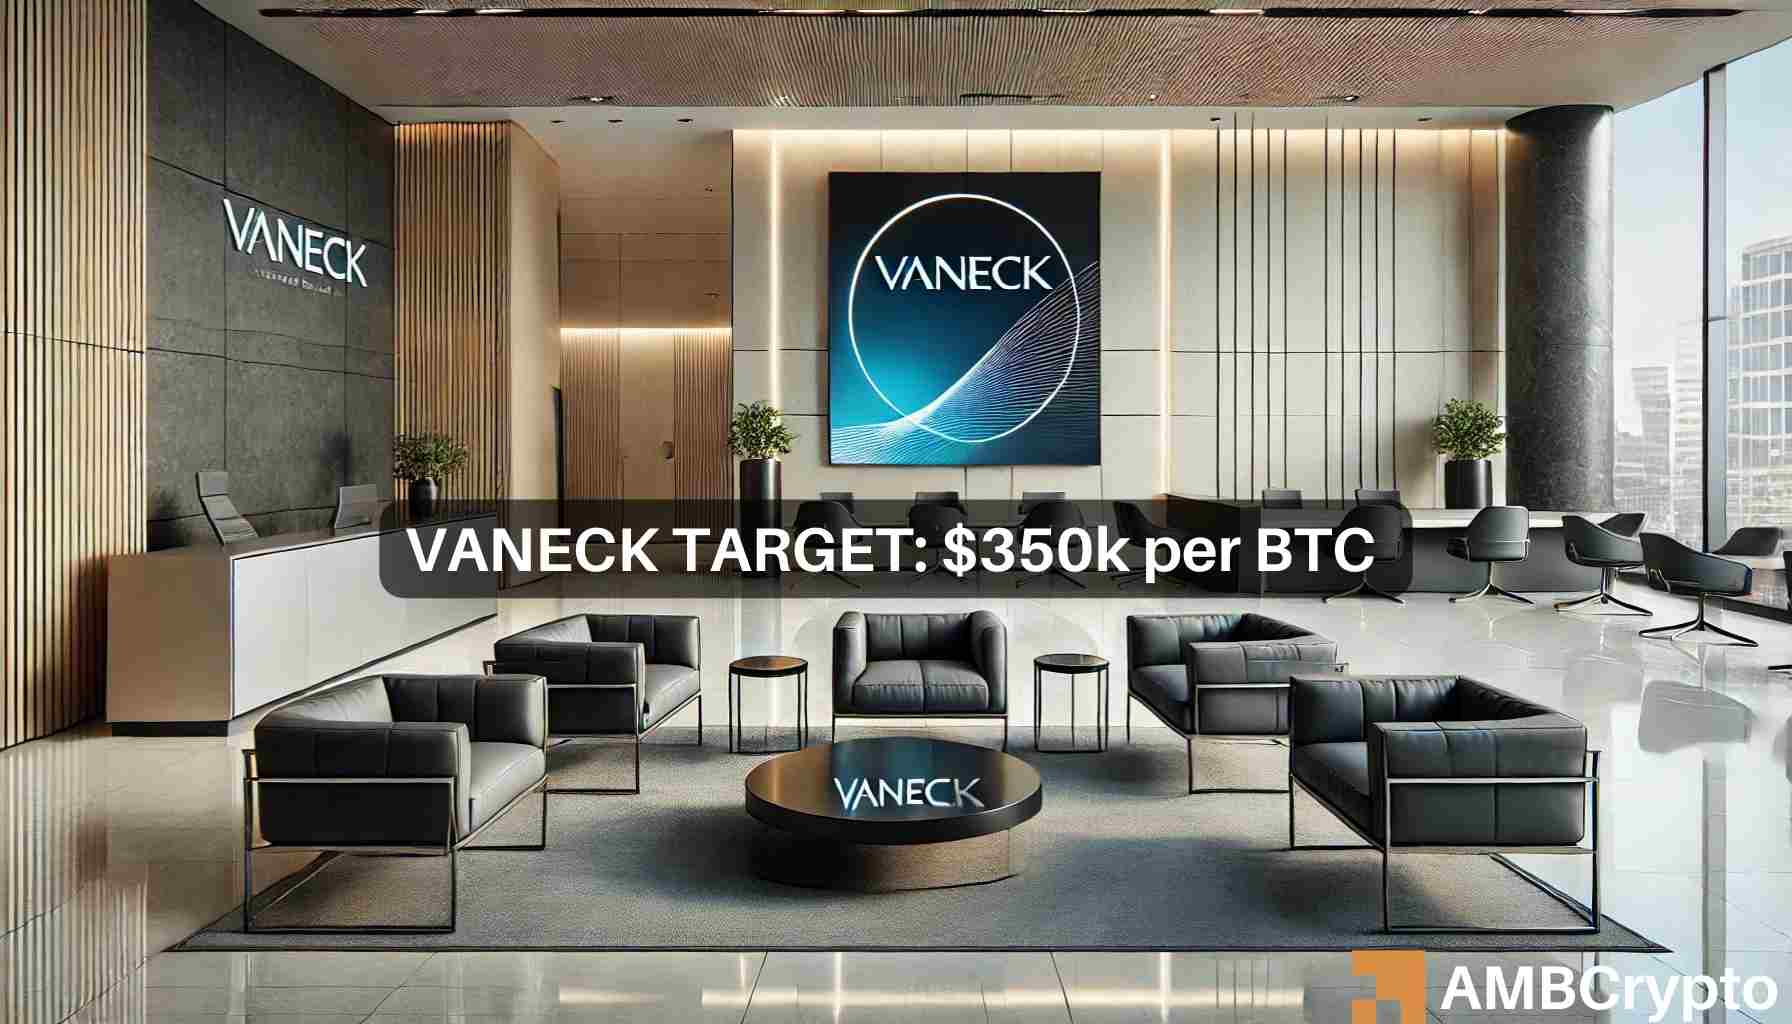 VanEck CEO: ‘Bitcoin will be half of gold market cap,’ can hit $350K